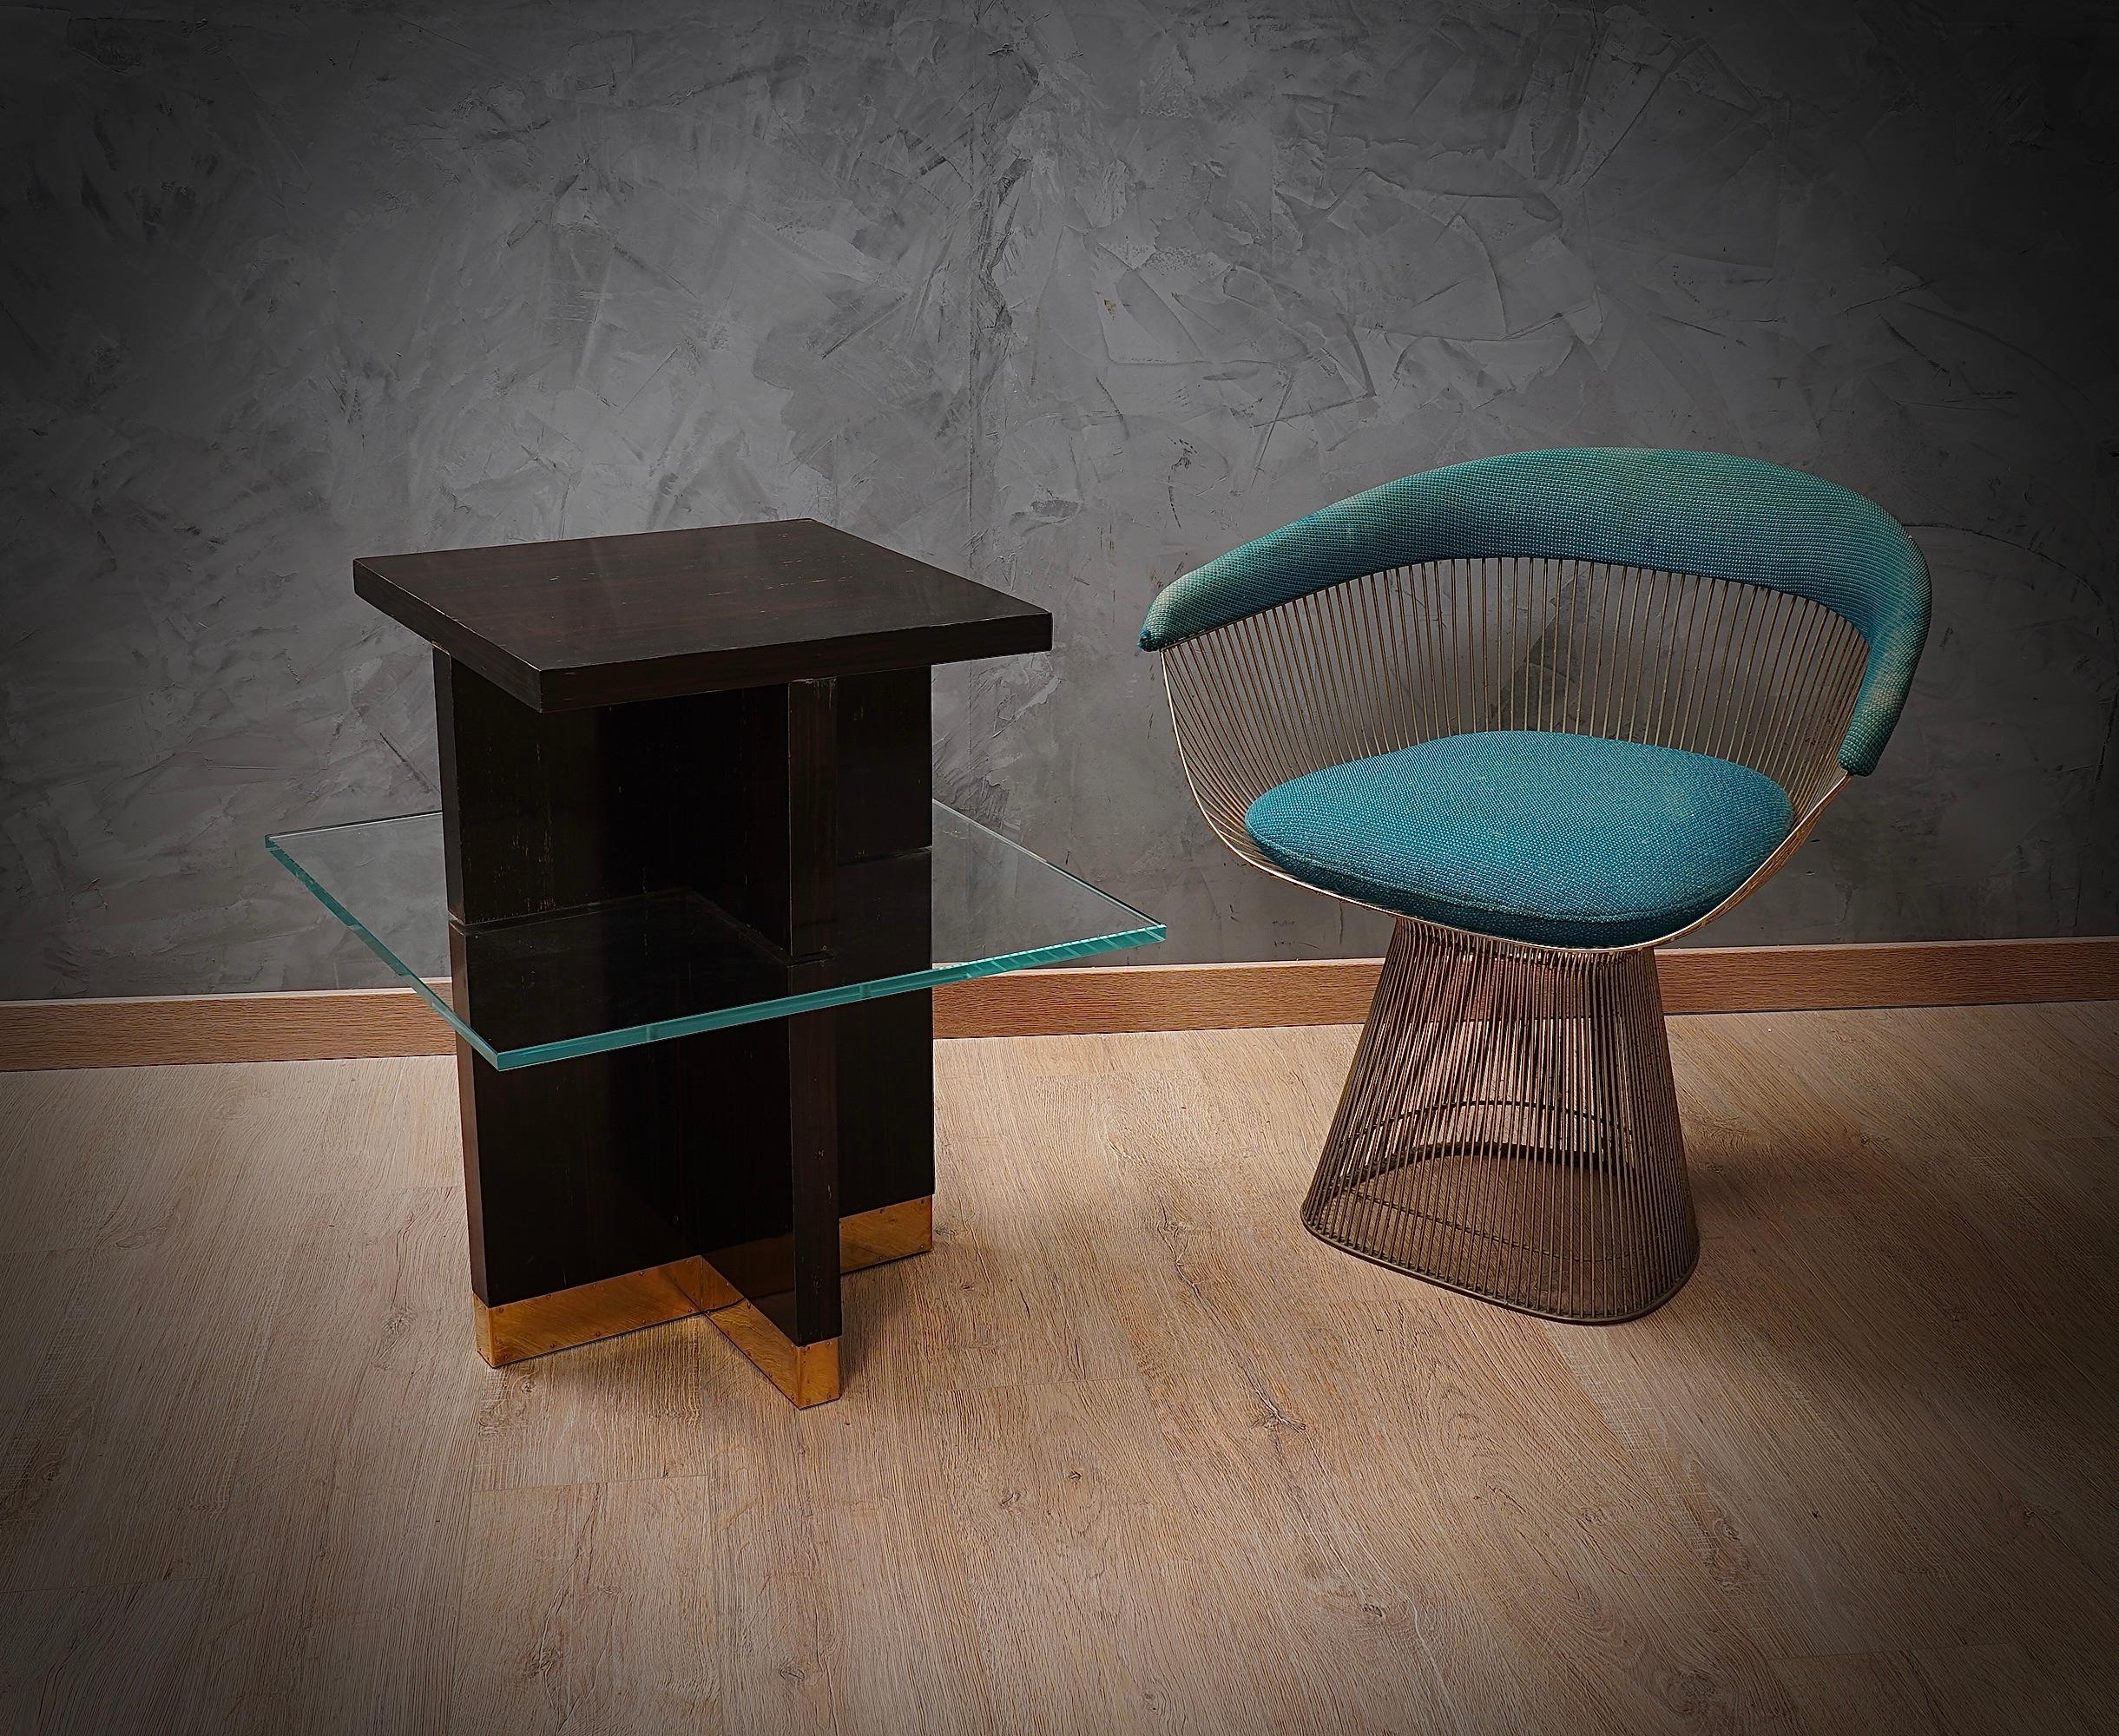 This extraordinary pair of side tables is built in a very particular way, in the middle of the last century. Fantastic IDEA for its design, a thick glass top intersected from a wooden base.

The side tables are all veneered in walnut wood, square in